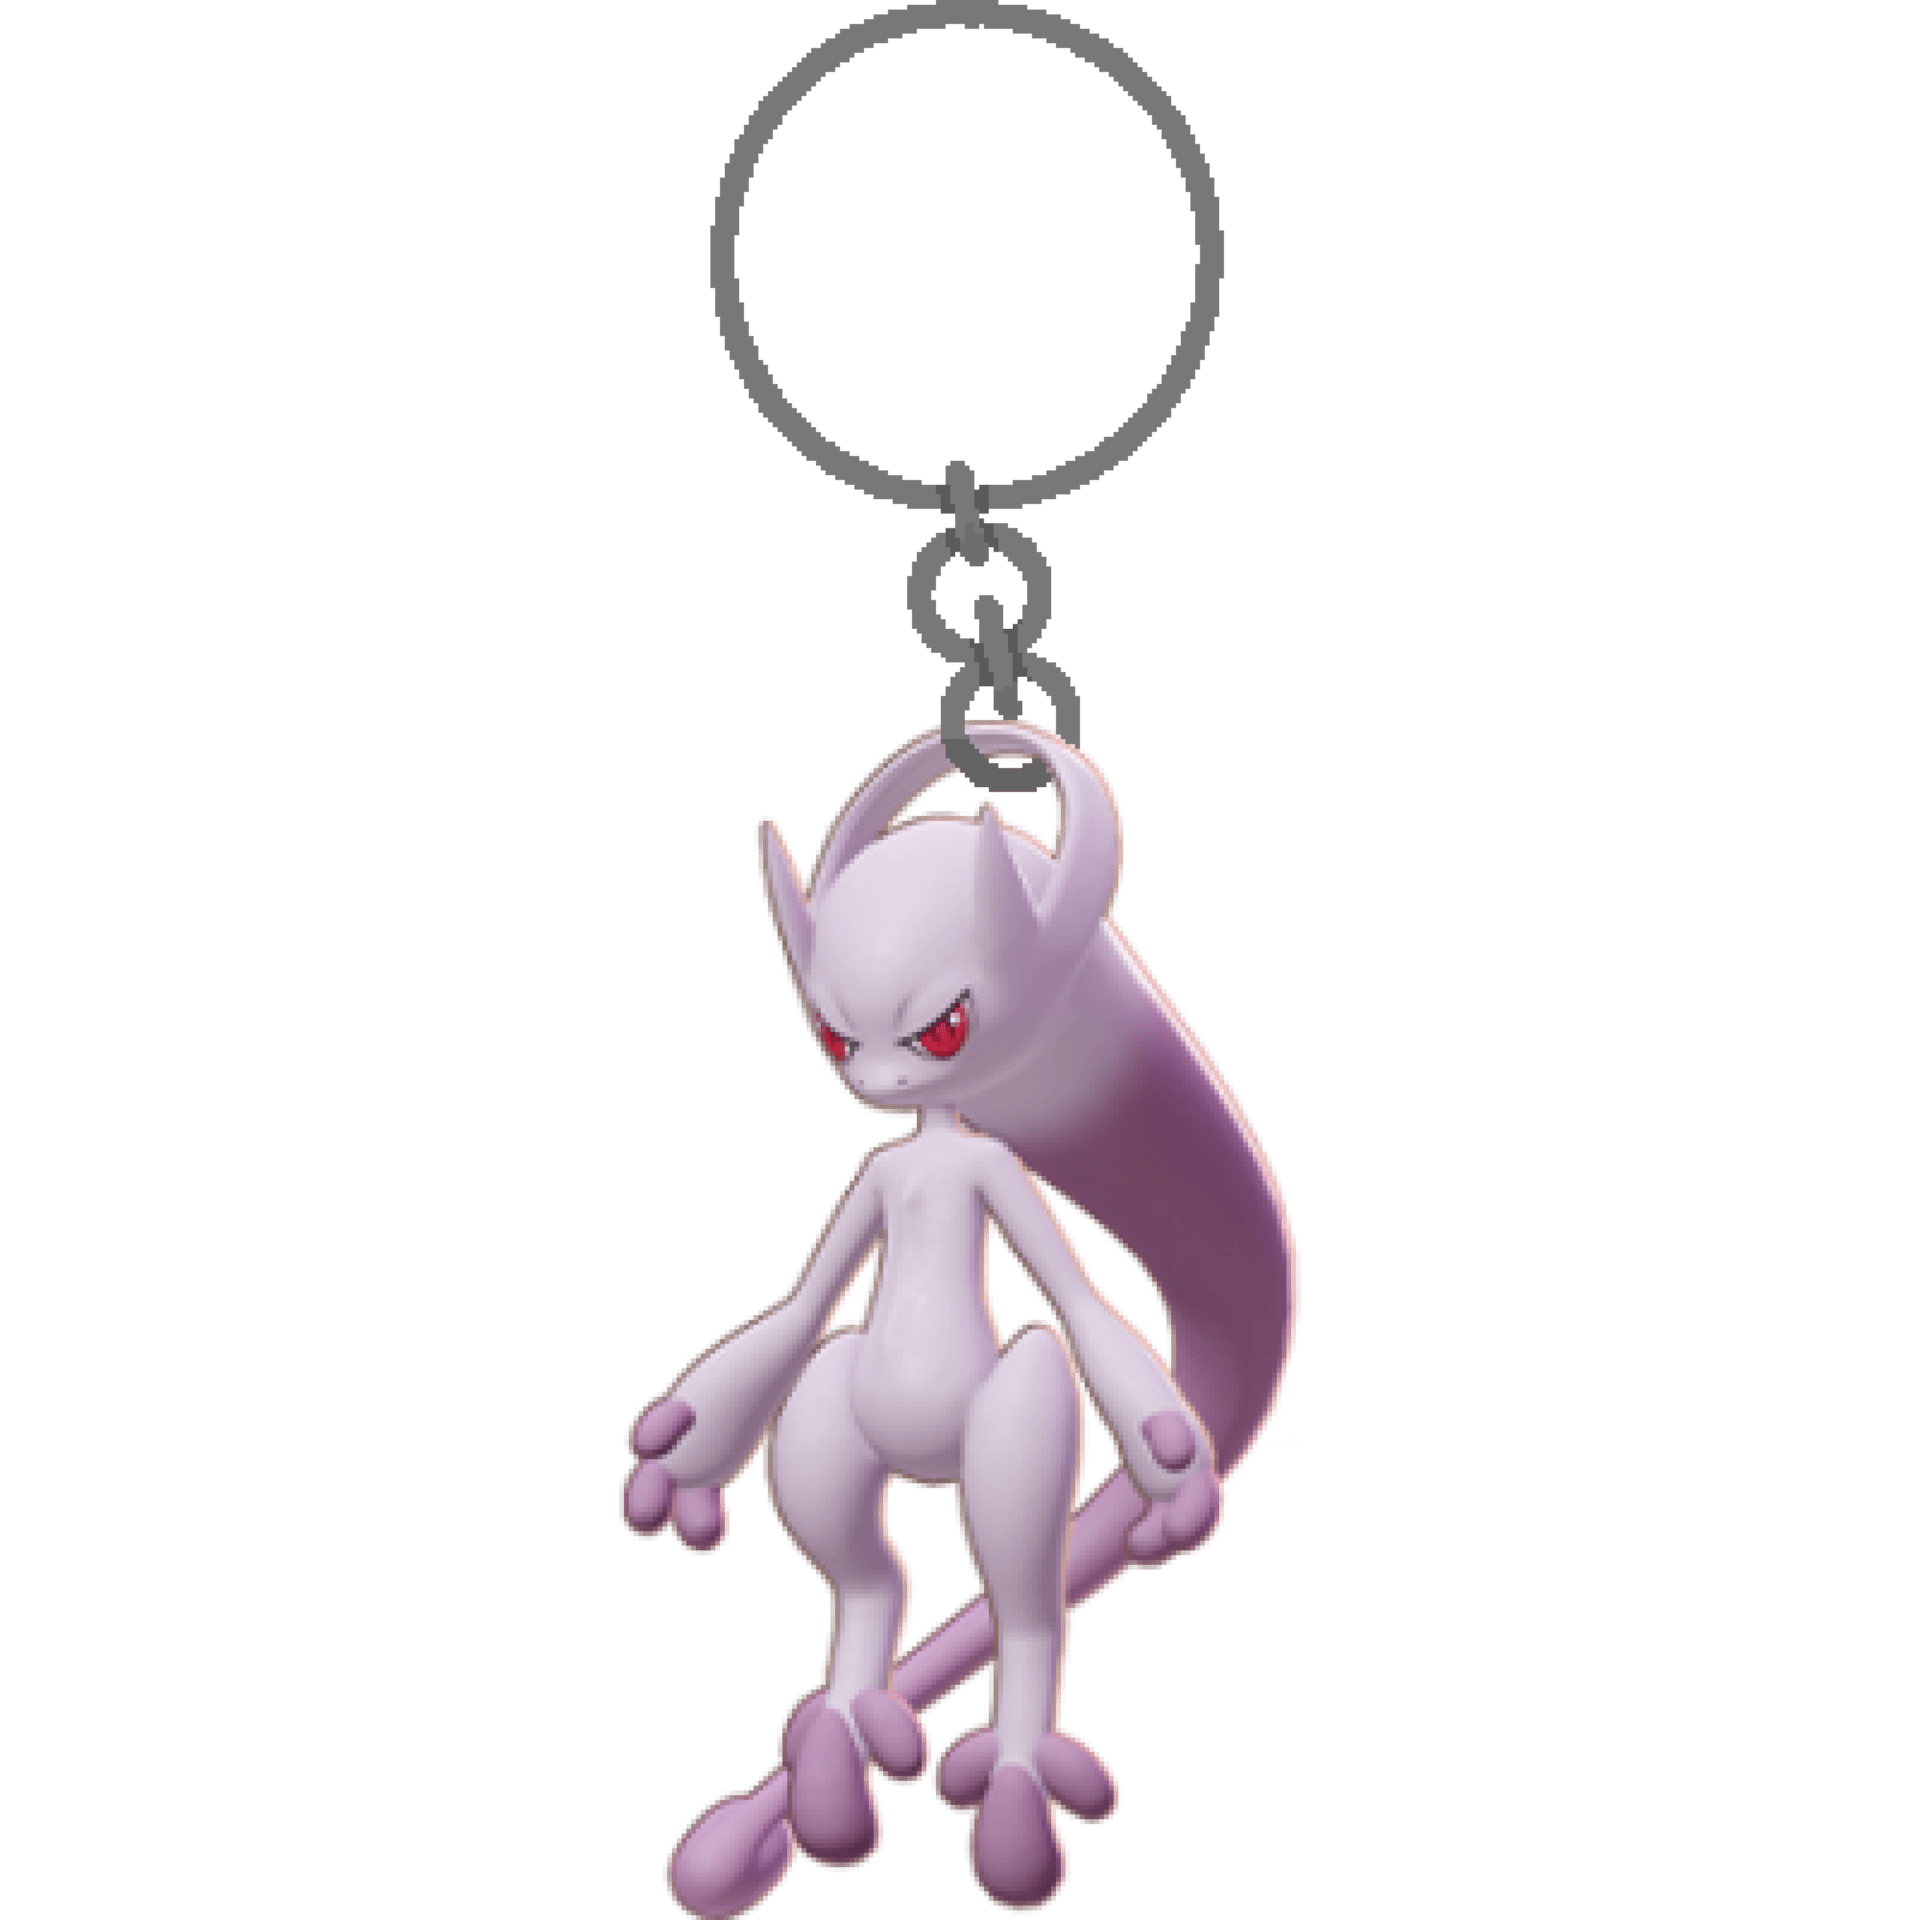 Pokemon Unite Mewtwo Y guide: Best movesets, builds, items, and more